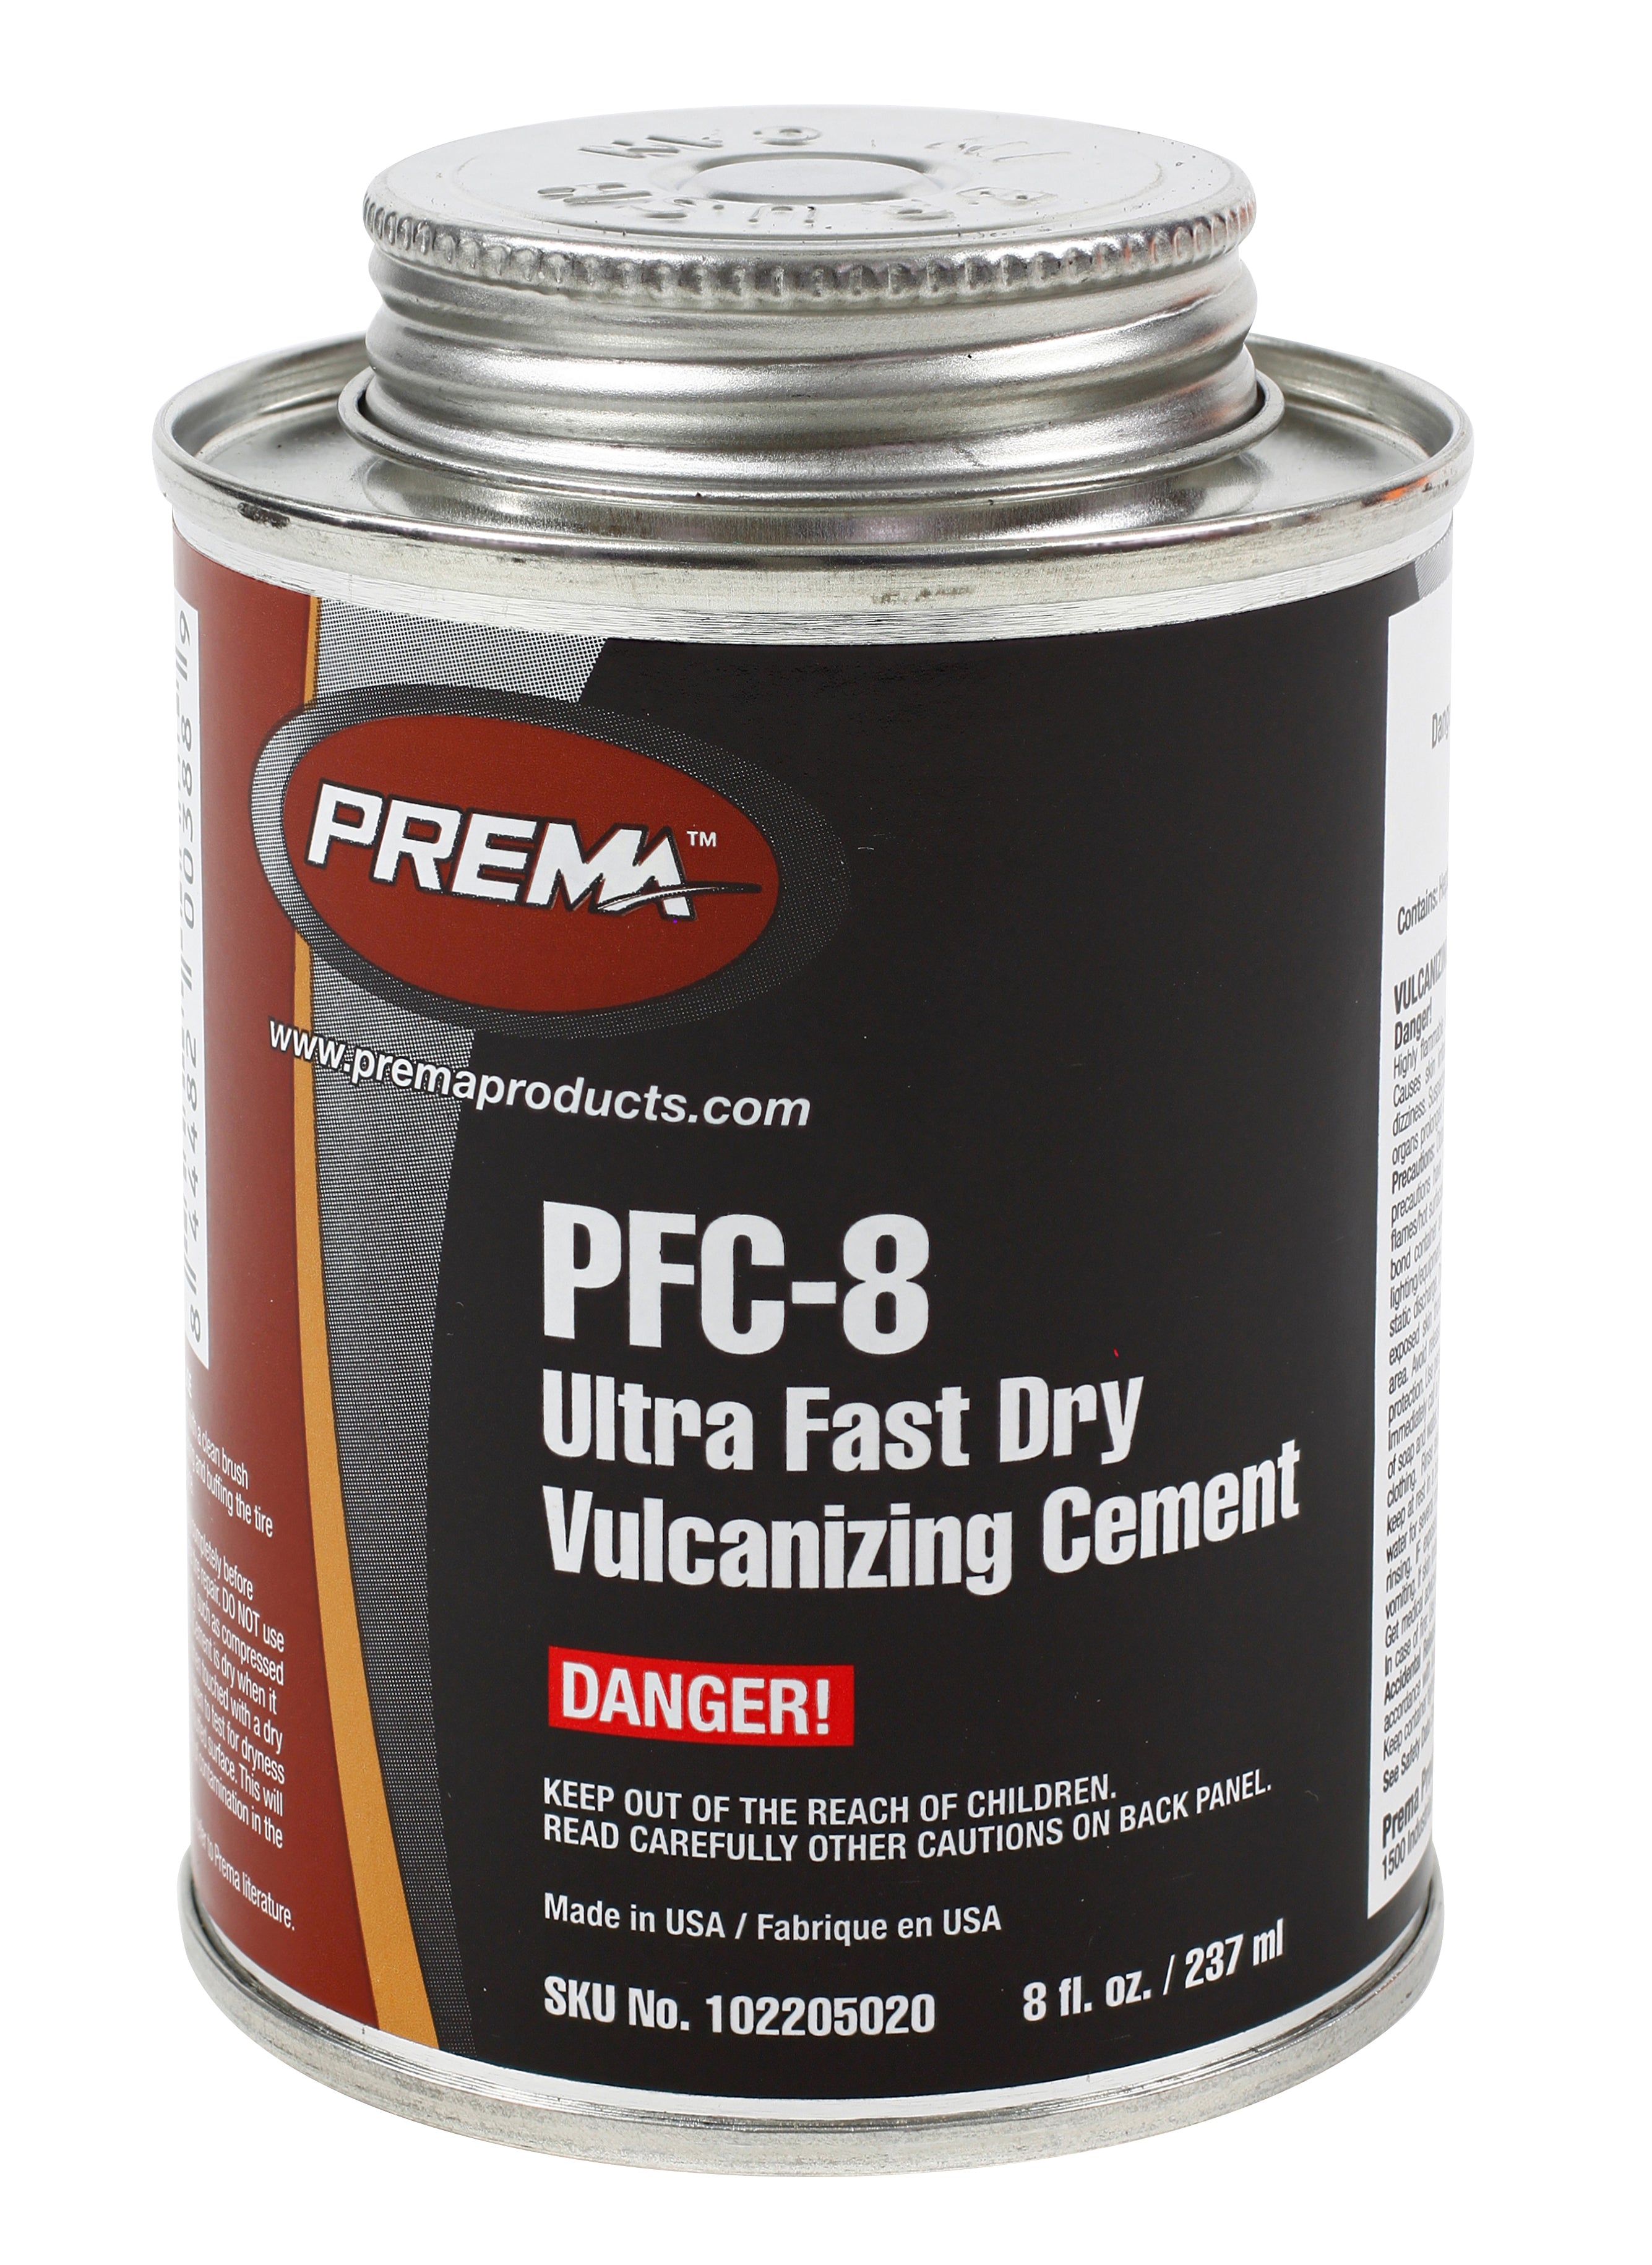 Prema PFC-8 Cement, (Clear Universal), 8 oz Brush Top Can (Flammable)  - Ultra Fast Dry